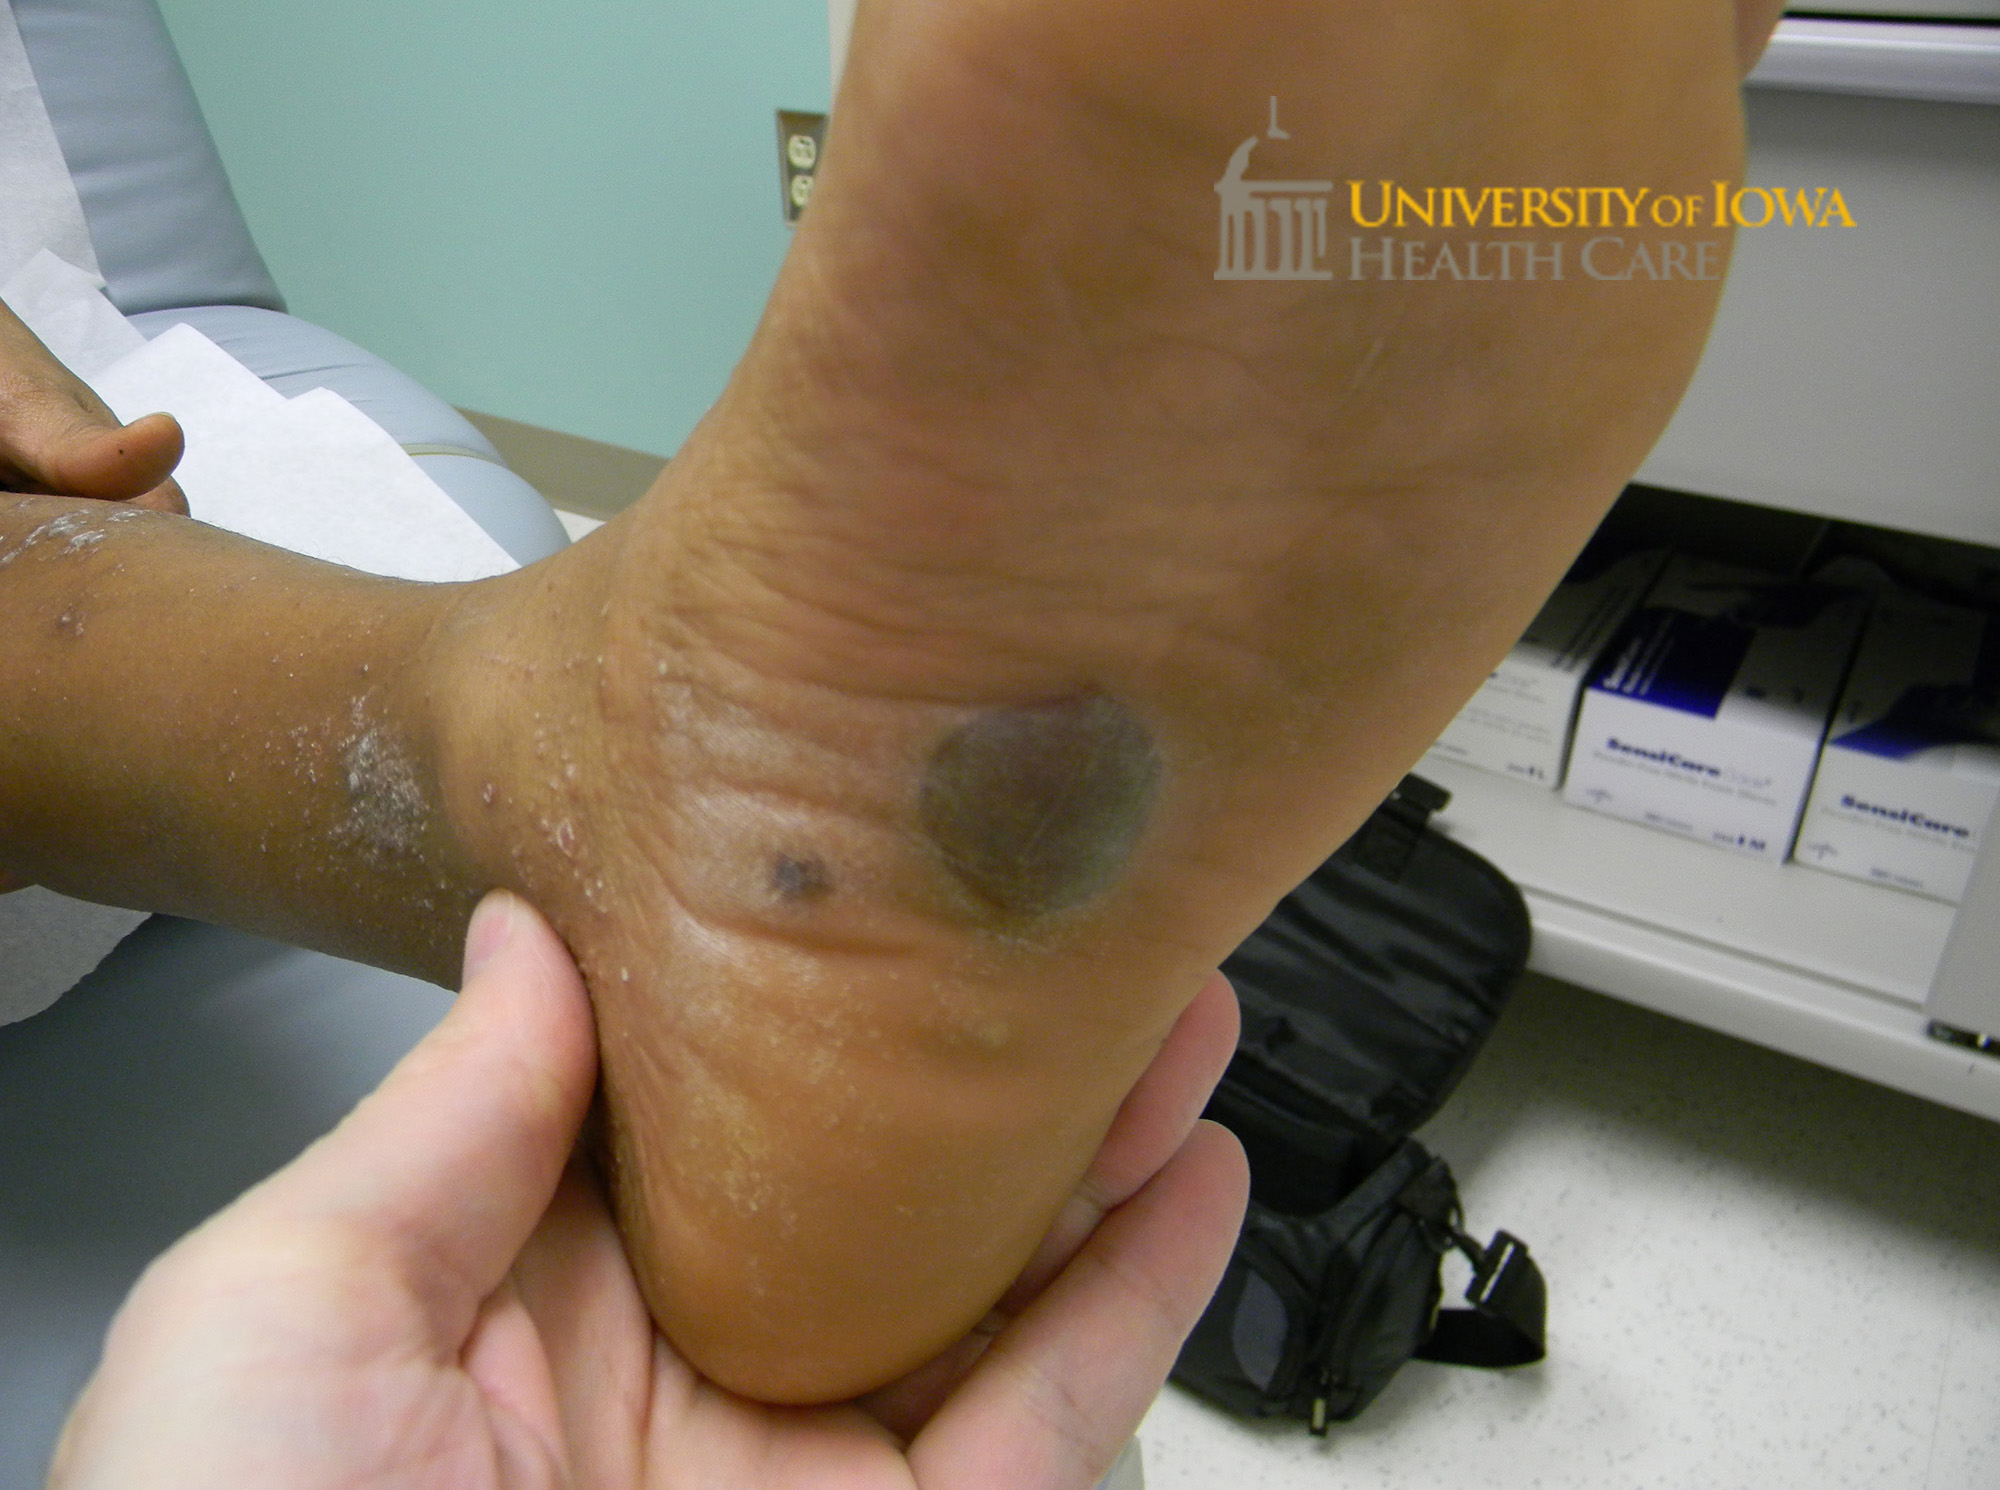 Pink to violaceous polygonal papules with overlying white scale coalesing into plaques on the lower extremity with hyperpigmented bulla on the dorsal foot. (click images for higher resolution).